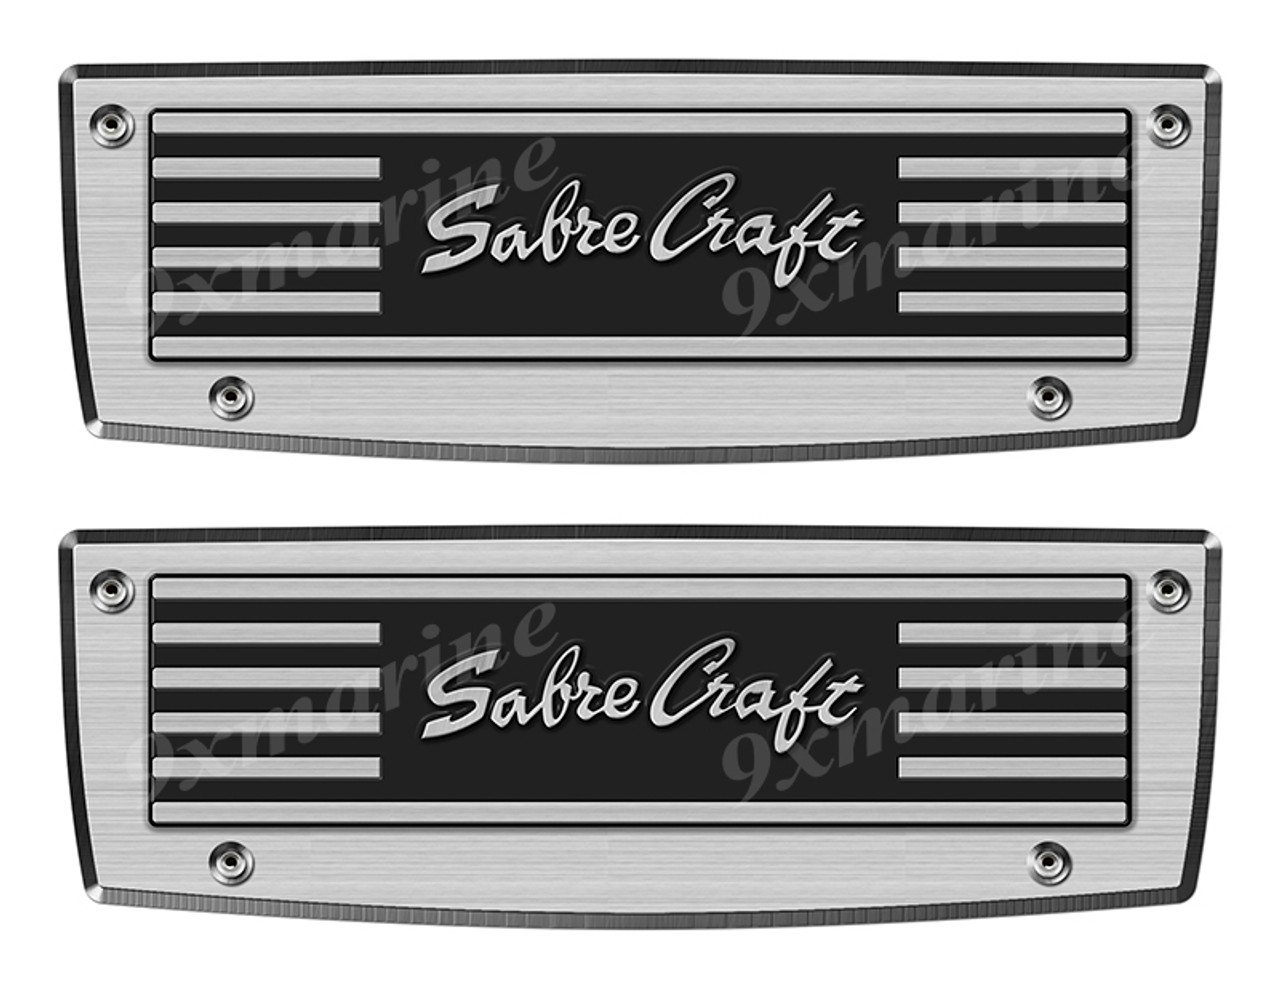 Two Sabre Craft Boat Vintage Stickers. Brushed Metal Style